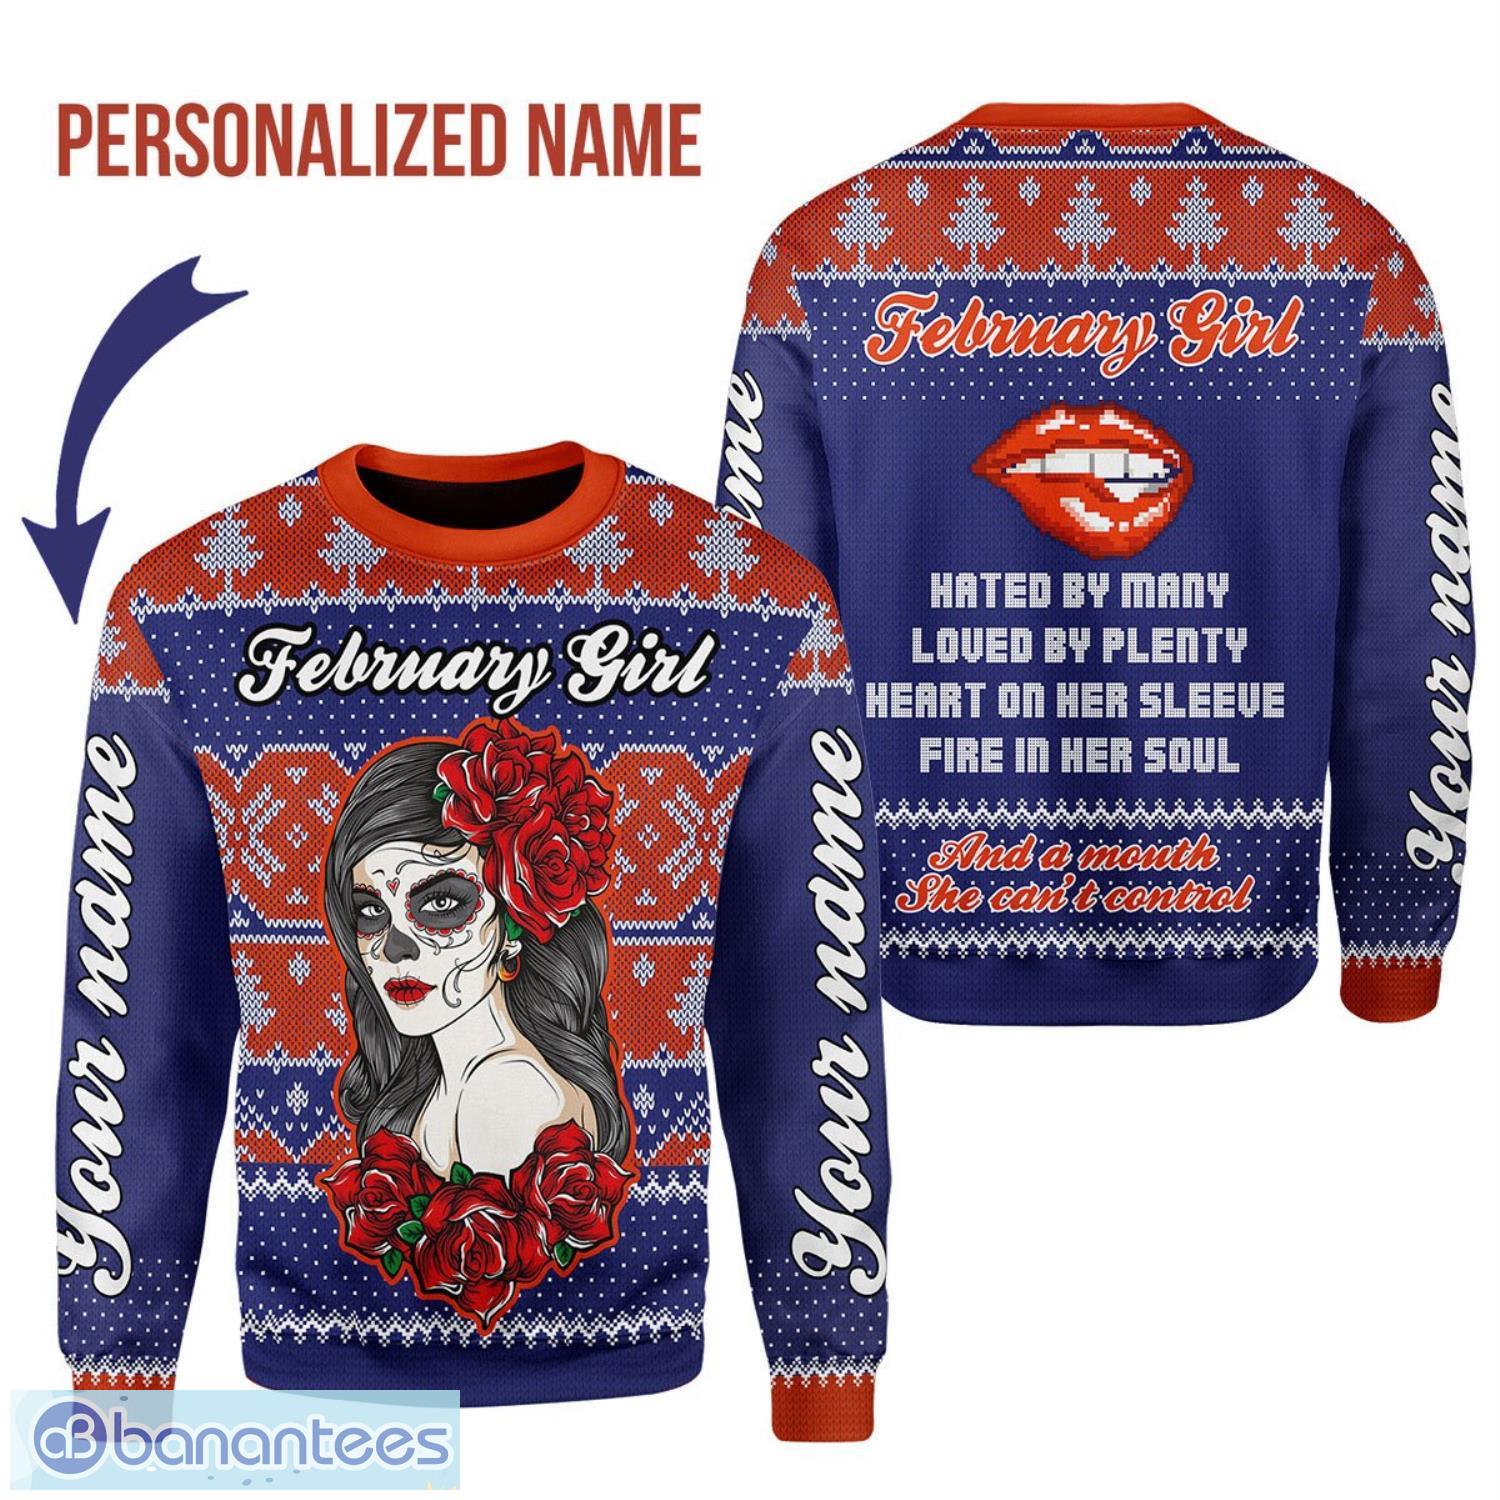 Personalized Name February Girl Hated By Many Loved By Plenty 3D Ugly Christmas Sweater Christmas Gift Product Photo 1